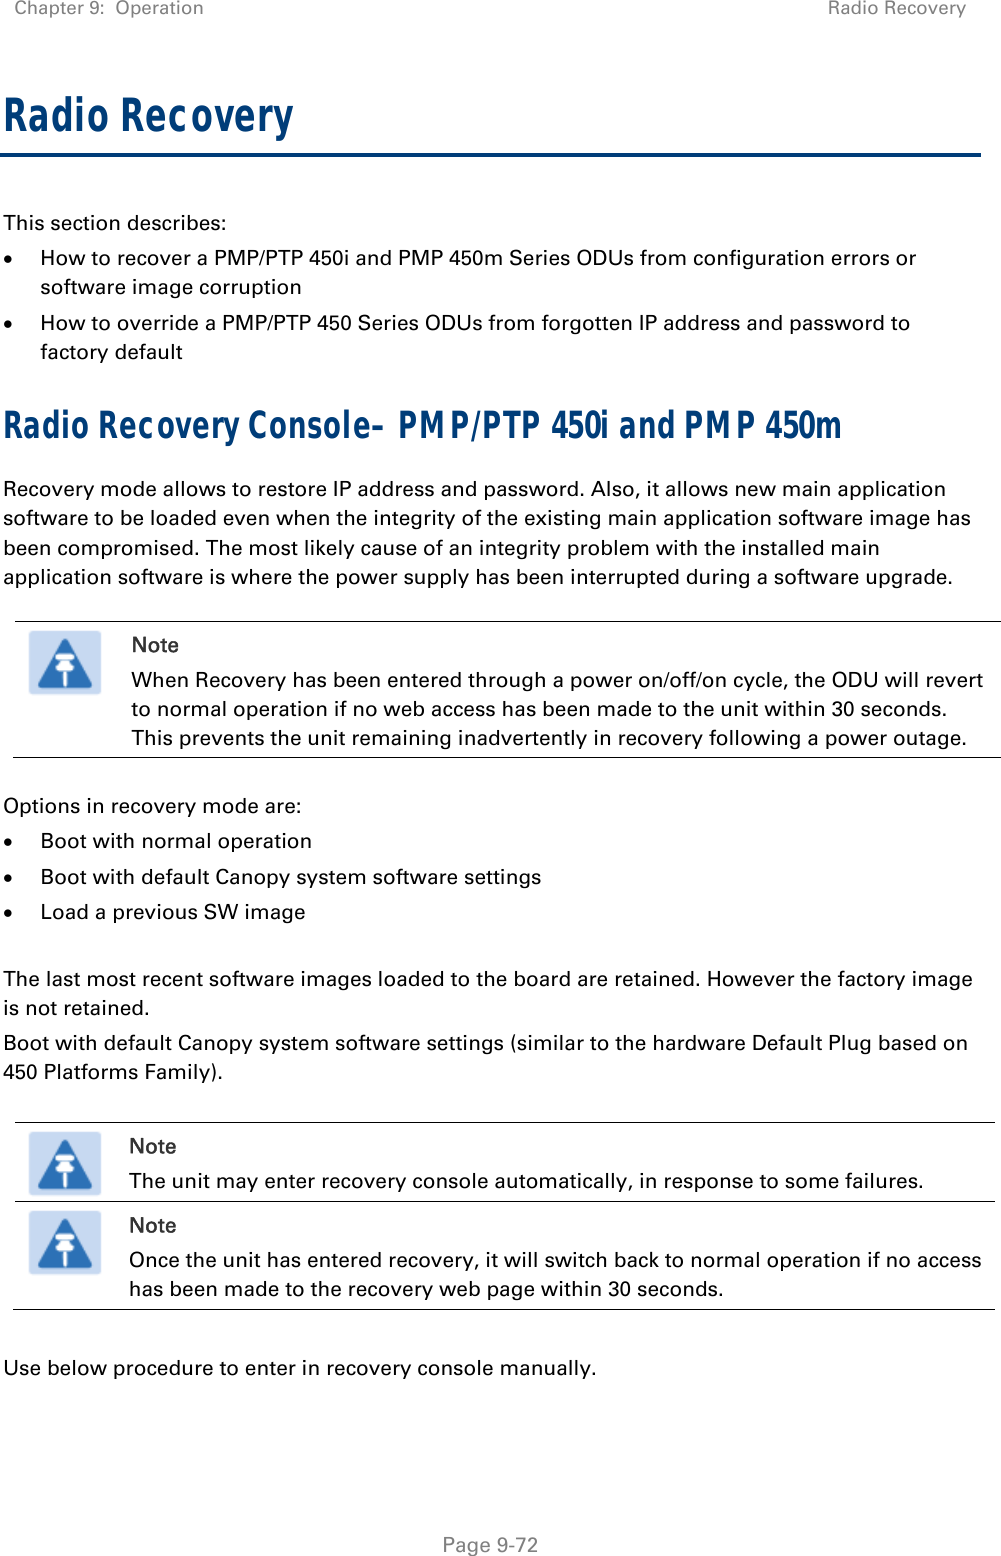 Chapter 9:  Operation  Radio Recovery   Page 9-72 Radio Recovery  This section describes:  How to recover a PMP/PTP 450i and PMP 450m Series ODUs from configuration errors or software image corruption  How to override a PMP/PTP 450 Series ODUs from forgotten IP address and password to factory default Radio Recovery Console– PMP/PTP 450i and PMP 450m Recovery mode allows to restore IP address and password. Also, it allows new main application software to be loaded even when the integrity of the existing main application software image has been compromised. The most likely cause of an integrity problem with the installed main application software is where the power supply has been interrupted during a software upgrade.   Note When Recovery has been entered through a power on/off/on cycle, the ODU will revert to normal operation if no web access has been made to the unit within 30 seconds. This prevents the unit remaining inadvertently in recovery following a power outage.  Options in recovery mode are:   Boot with normal operation  Boot with default Canopy system software settings  Load a previous SW image  The last most recent software images loaded to the board are retained. However the factory image is not retained. Boot with default Canopy system software settings (similar to the hardware Default Plug based on 450 Platforms Family).   Note The unit may enter recovery console automatically, in response to some failures.  Note Once the unit has entered recovery, it will switch back to normal operation if no access has been made to the recovery web page within 30 seconds.  Use below procedure to enter in recovery console manually.   